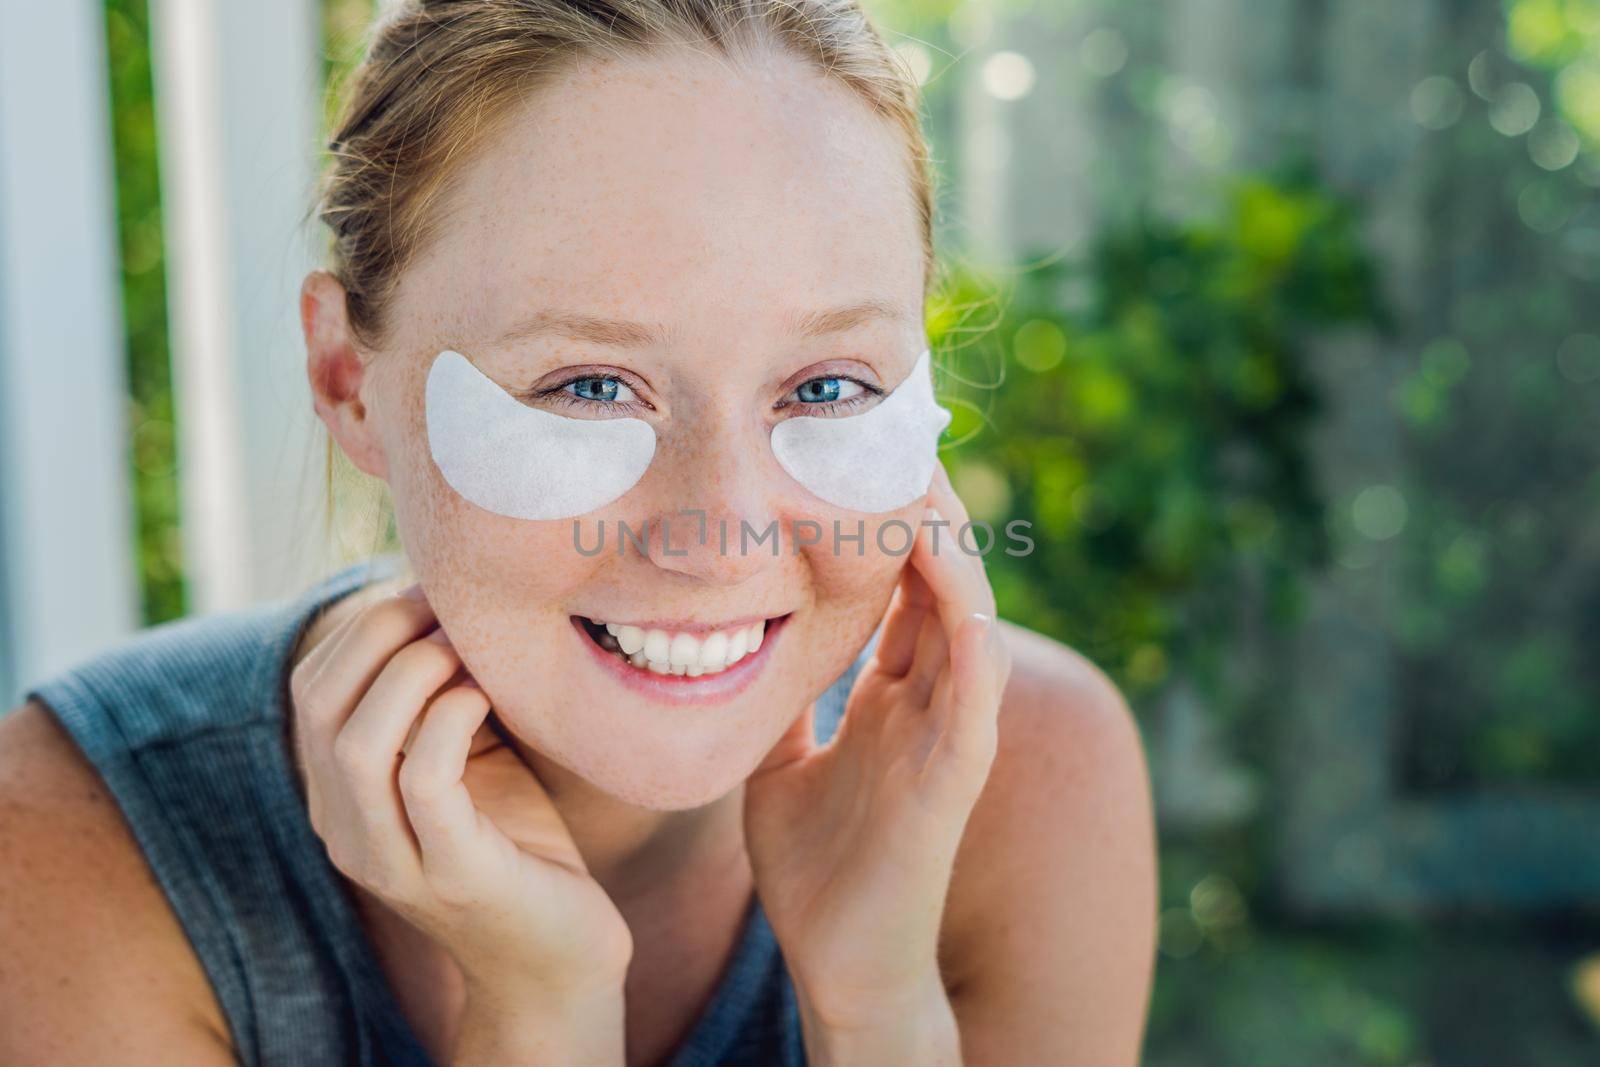 Portrait of Beauty Red-haired woman with eye patches showing an effect of perfect skin. Spa Girl.